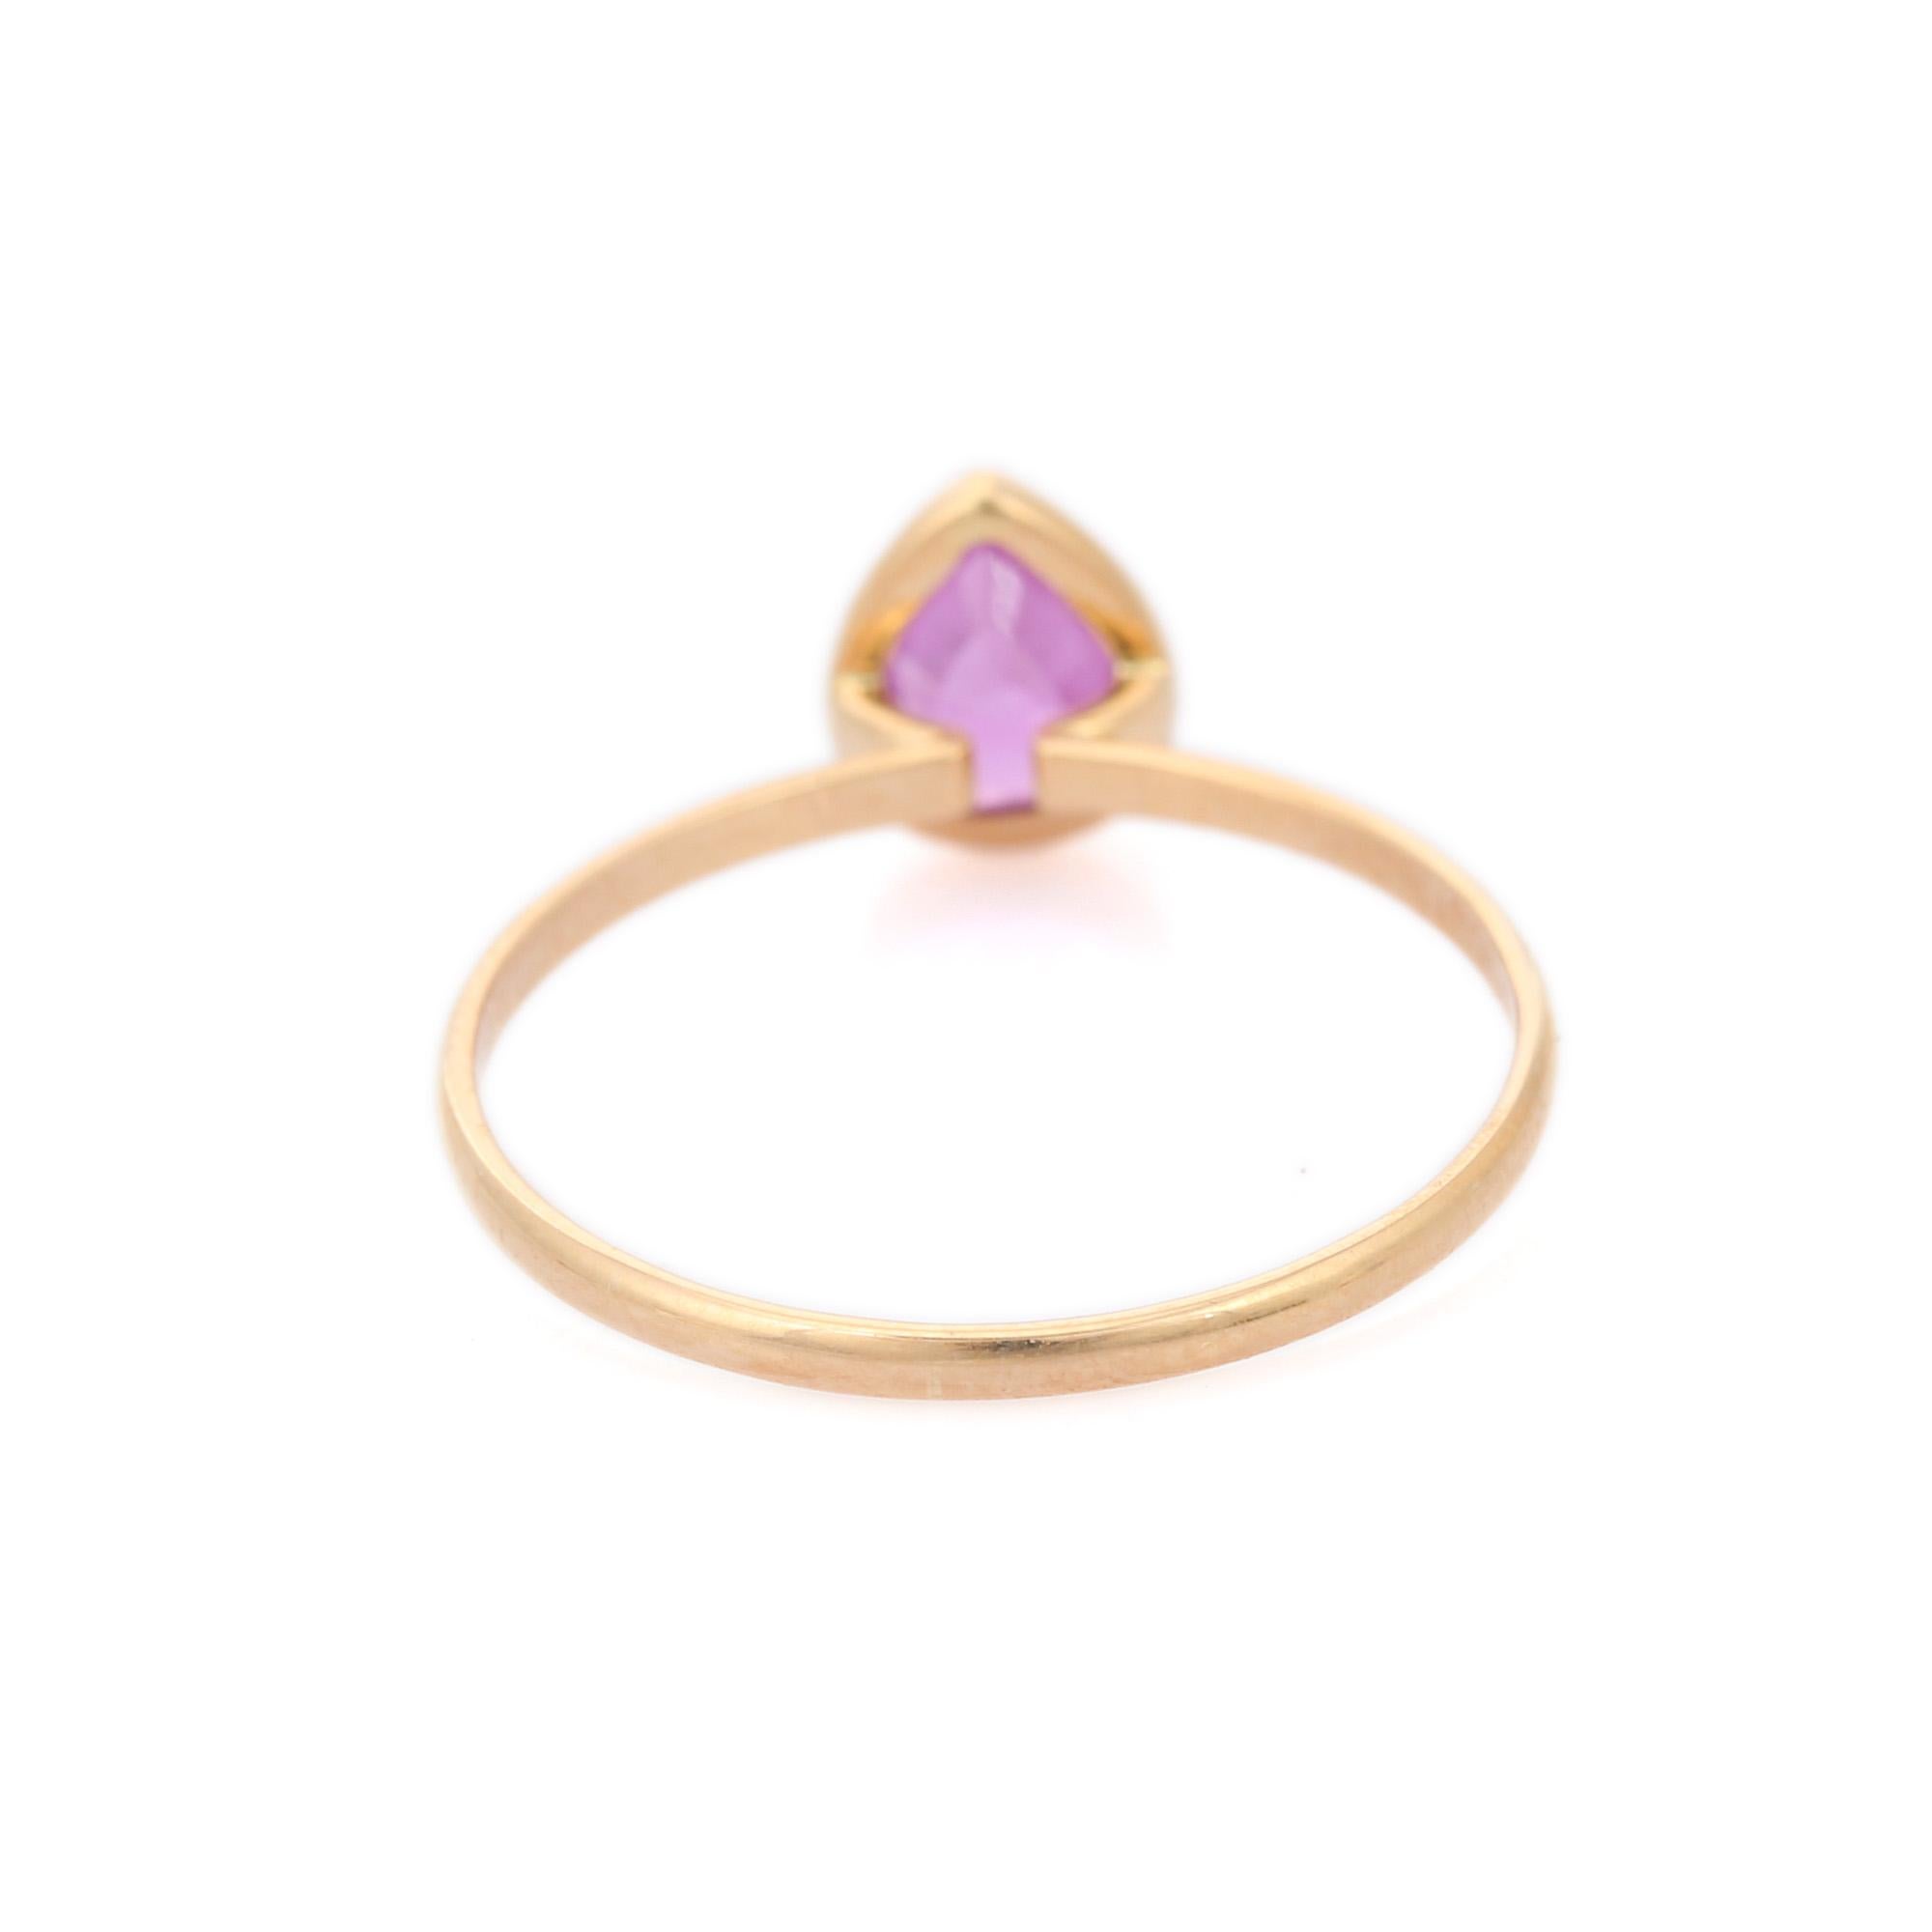 For Sale:  Pink Sapphire Pear Cut Dainty Solitaire Ring in 18K Yellow Gold 7